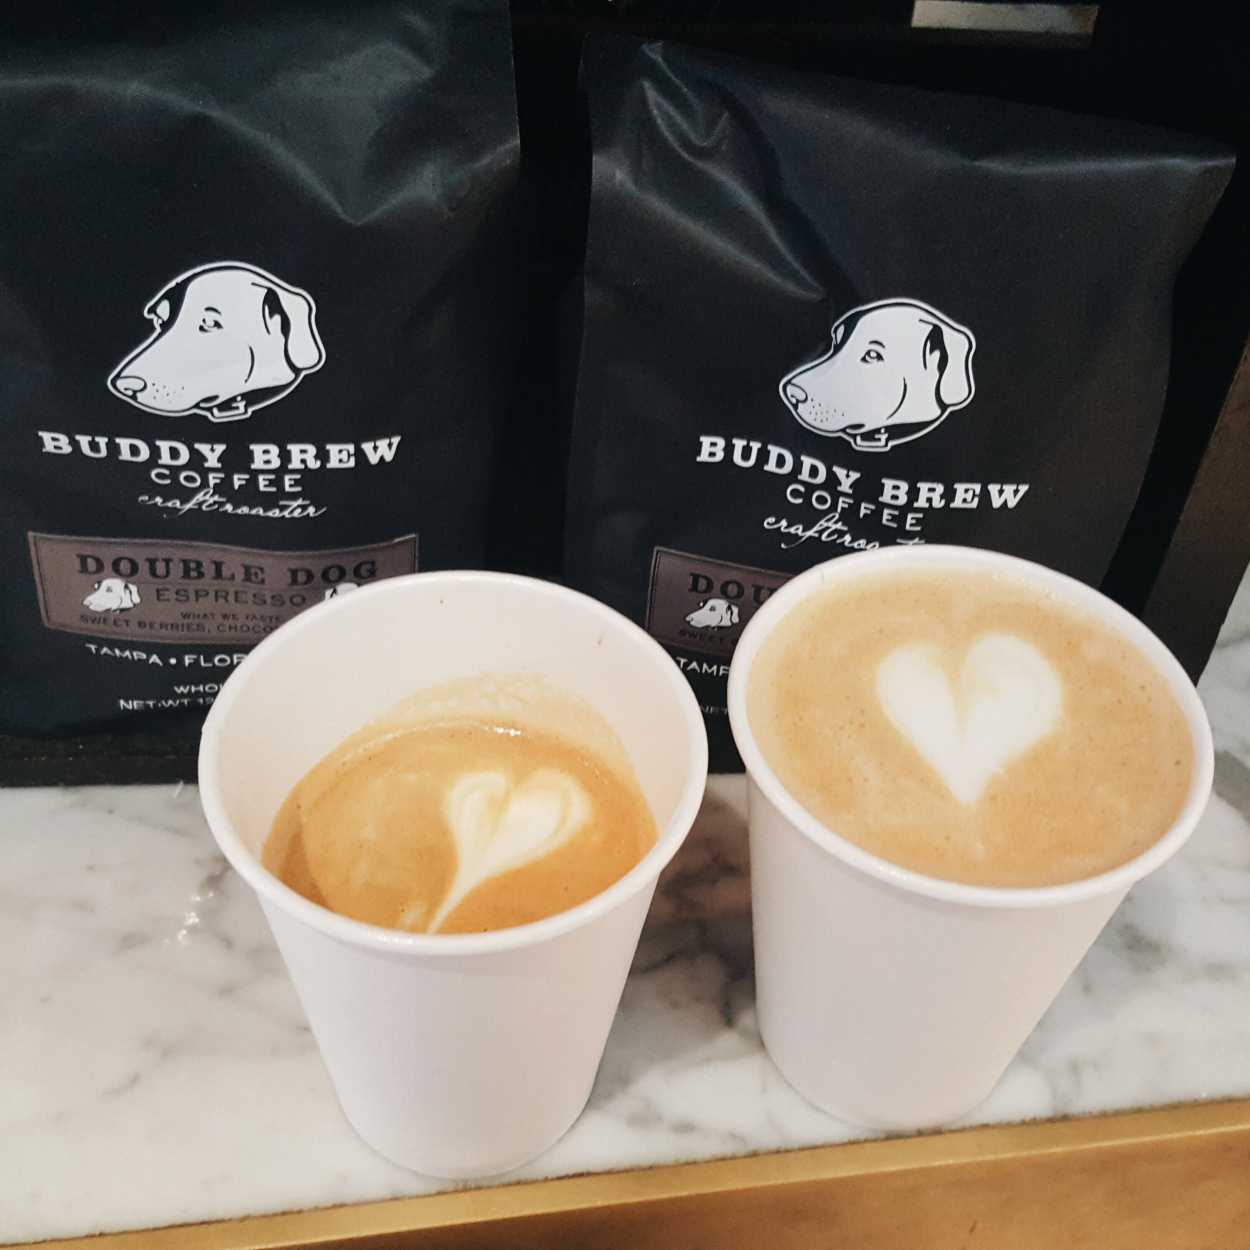 Two coffees from Buddy Brew Coffee